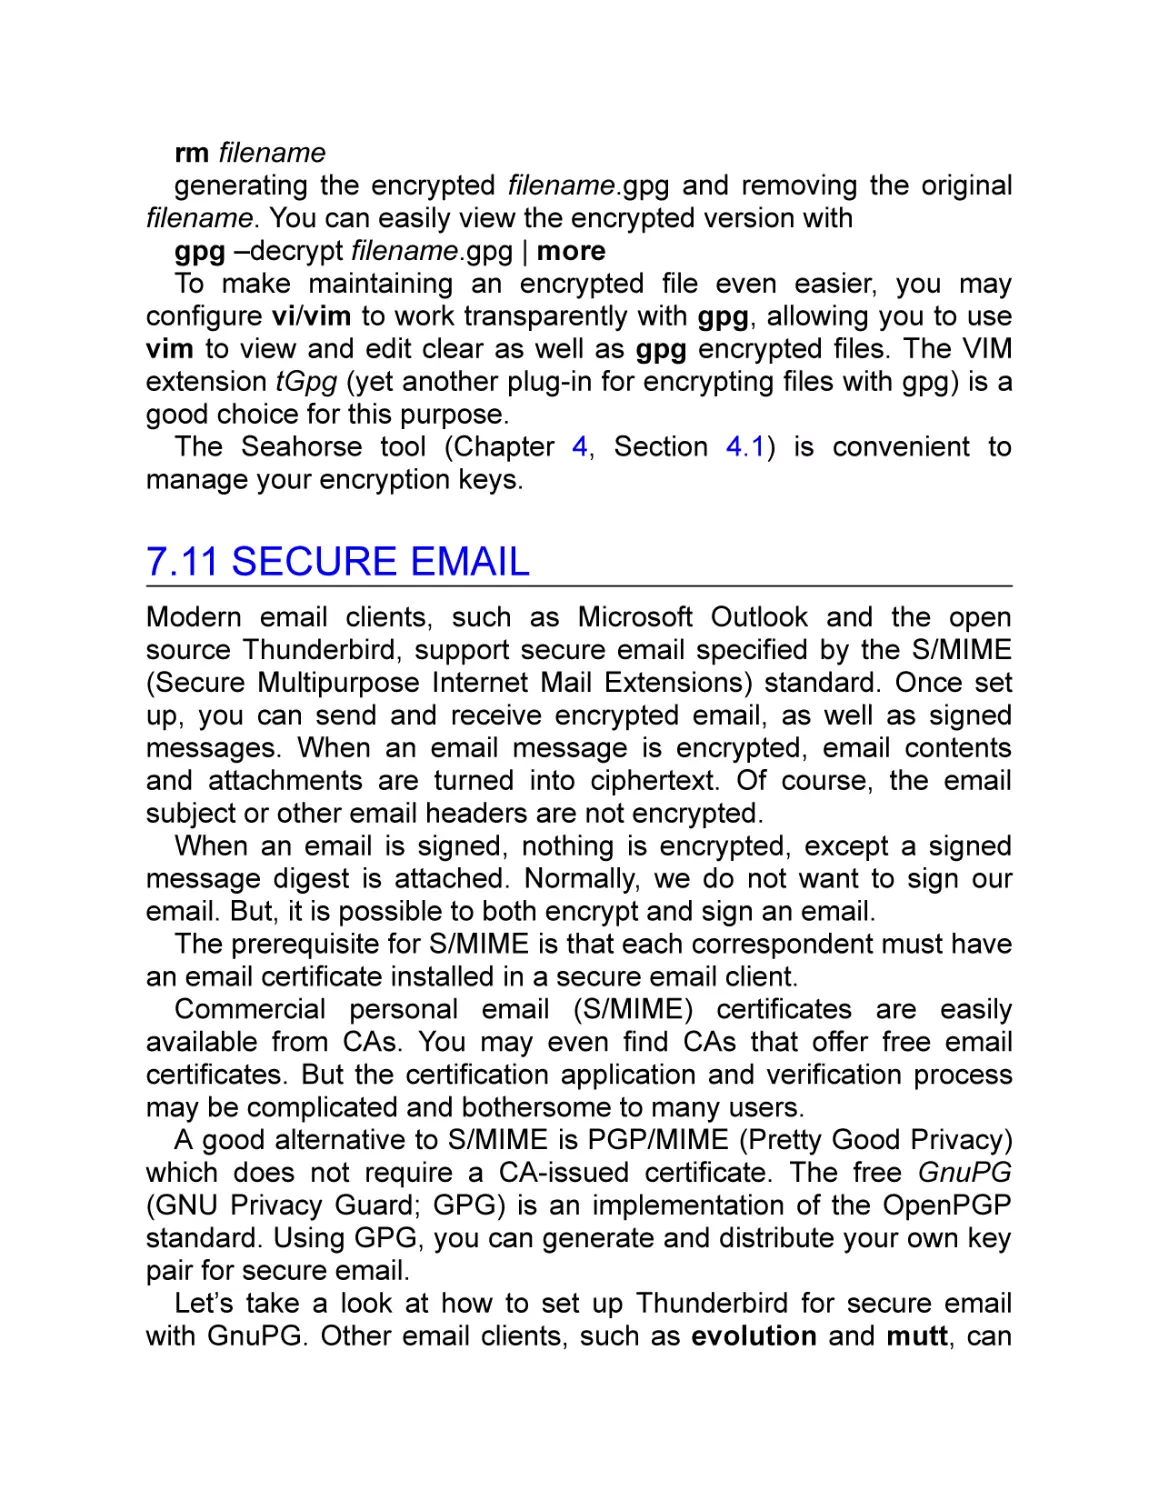 7.11 Secure Email